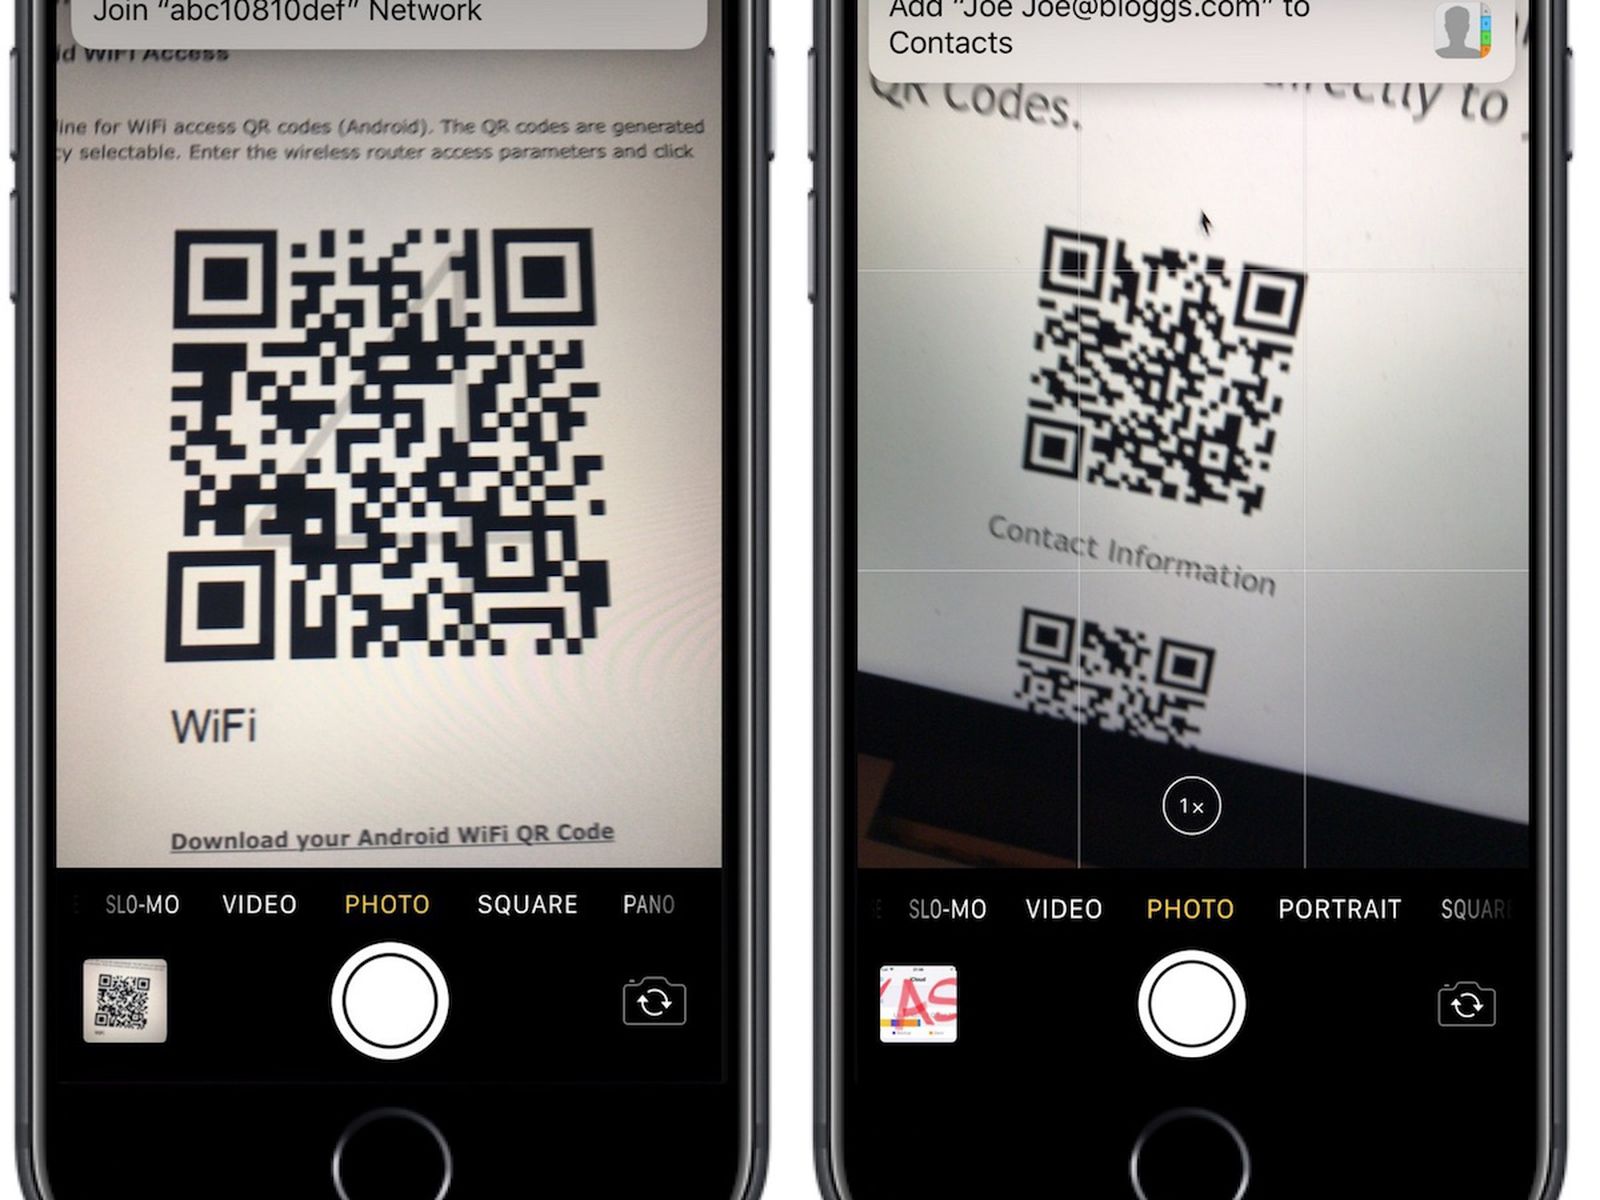 Iphone Can Scan Qr Codes Directly In Camera App On Ios 11 - Macrumors